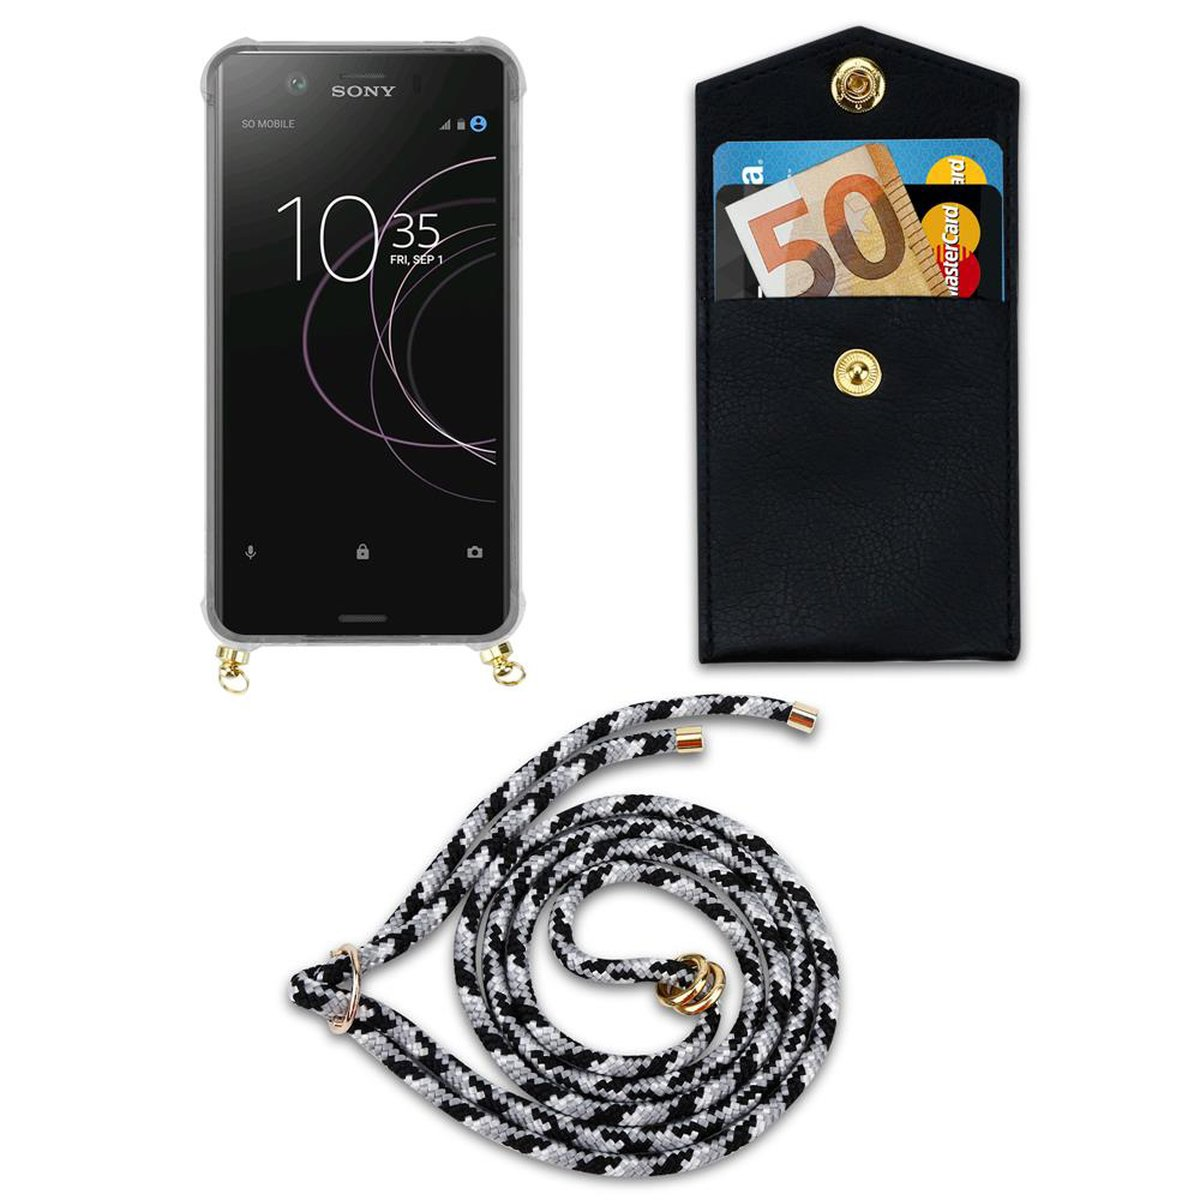 Ringen, CAMOUFLAGE Xperia CADORABO Kette und Backcover, Hülle, Kordel abnehmbarer XZ1, SCHWARZ Sony, Gold Handy Band mit